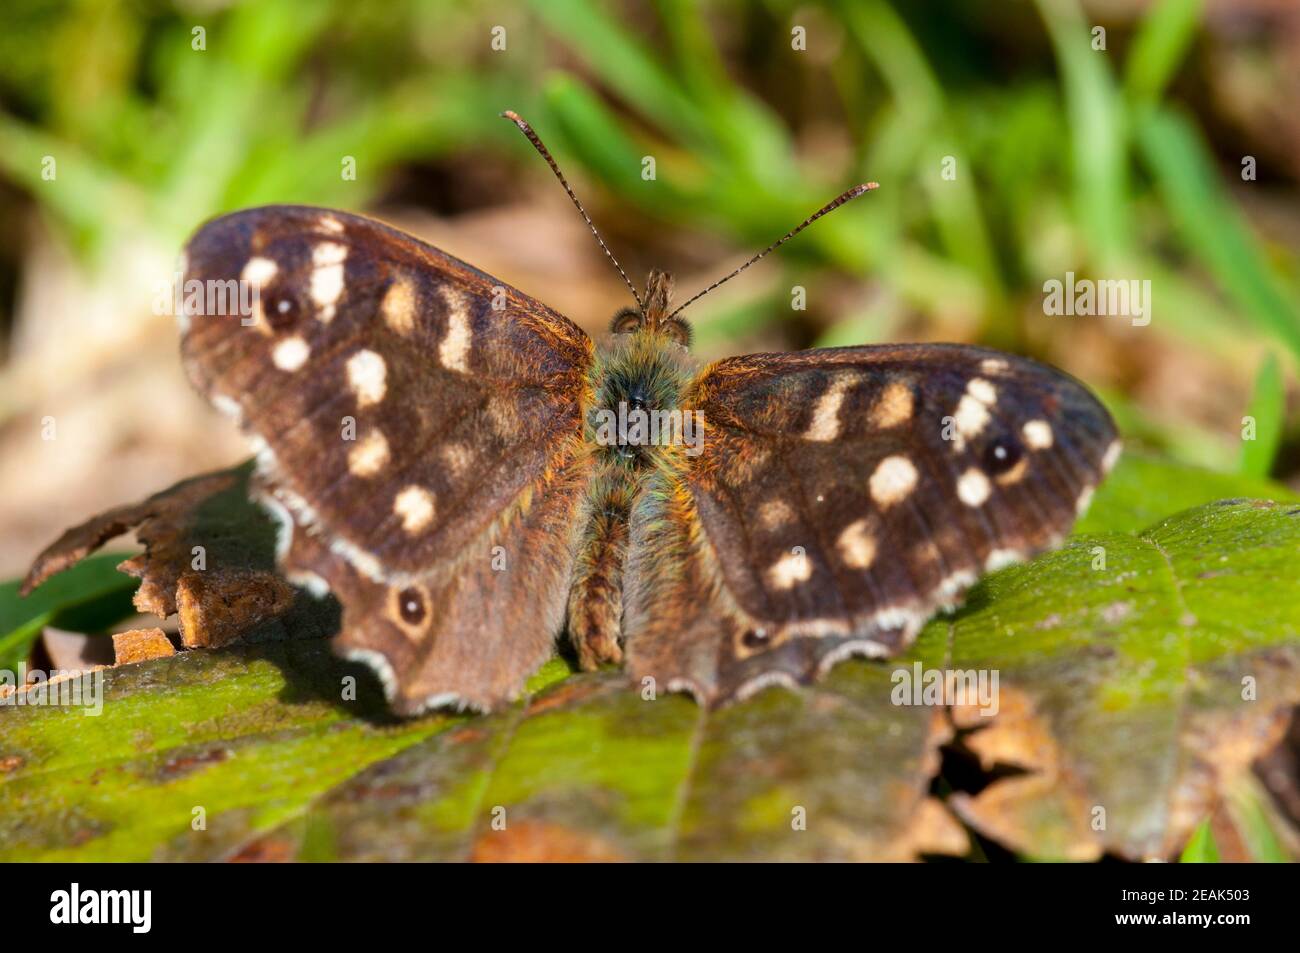 An adult speckled wood butterfly (Pararge aegeria) basking on a leaf in Thorp Perrow Arboretum, North Yorkshire. September. Stock Photo